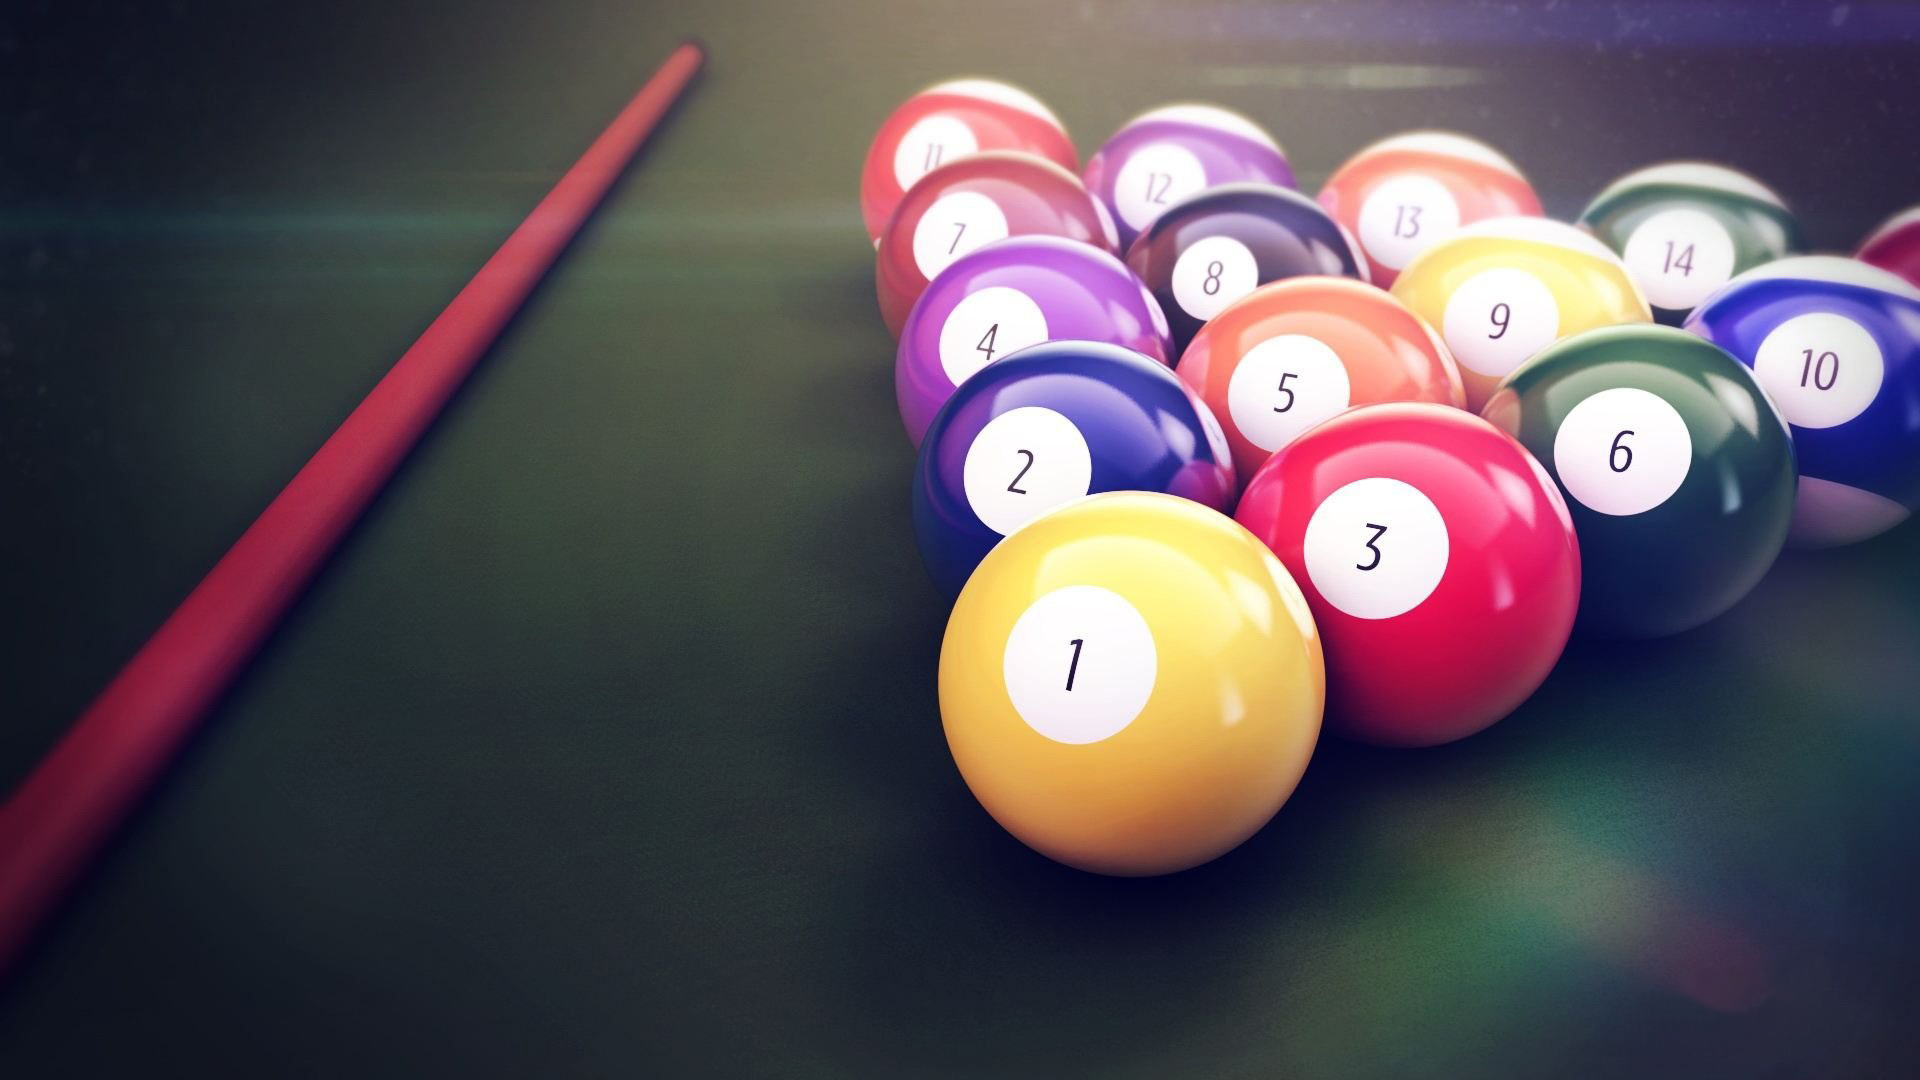 Pool (Cue Sports): Eight-ball, A game with a cue played on a classic table with six pockets and sixteen solid balls. 1920x1080 Full HD Background.